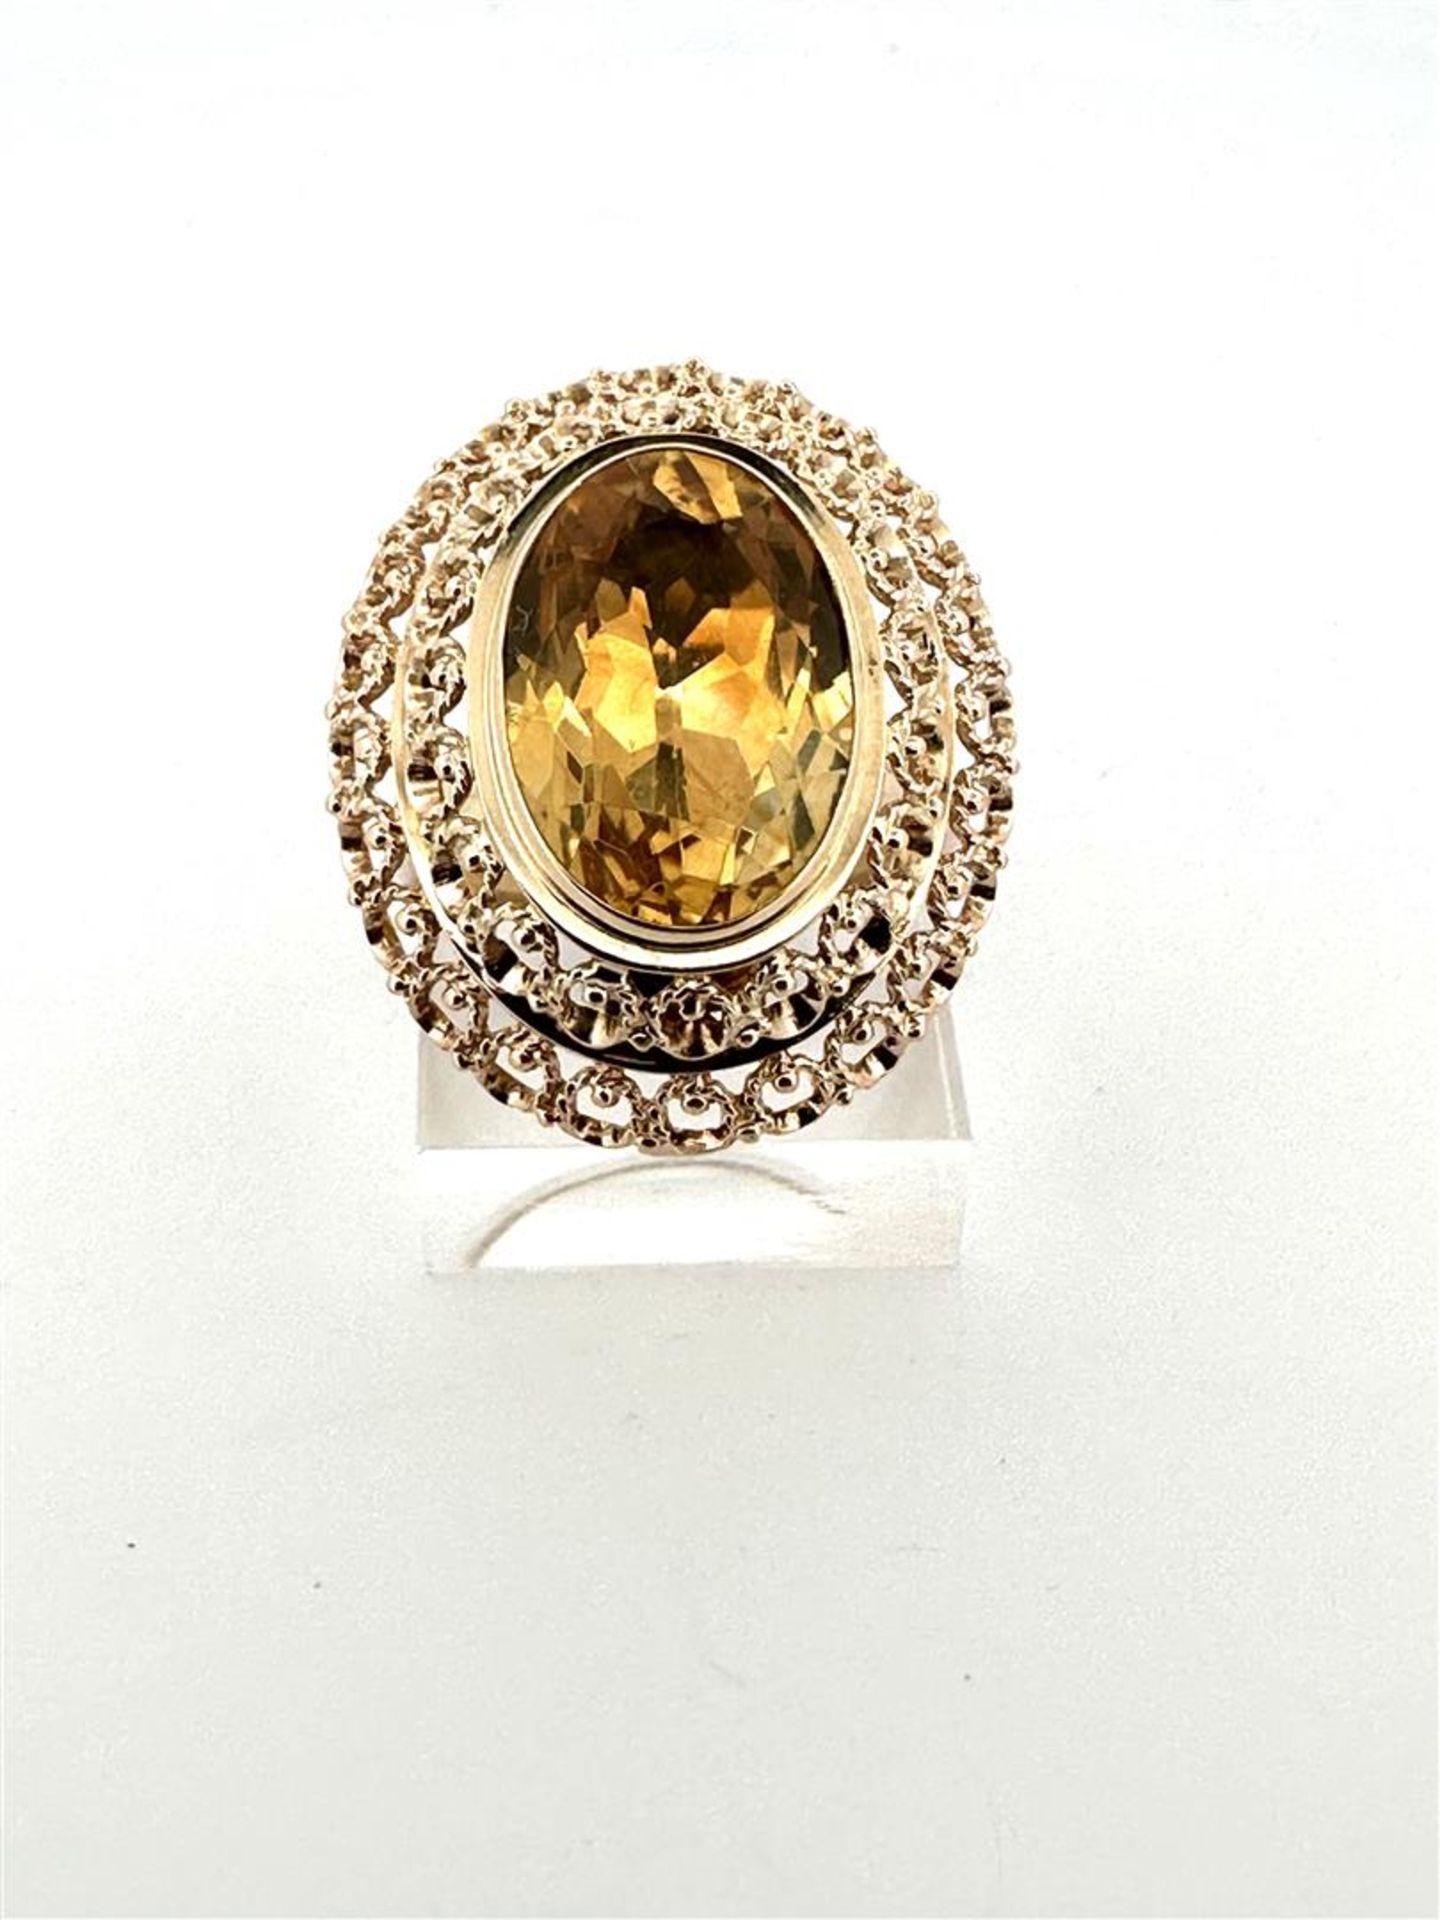 14kt yellow gold statement cocktail ring with citrine. 
The ring has a beautiful openwork double edg